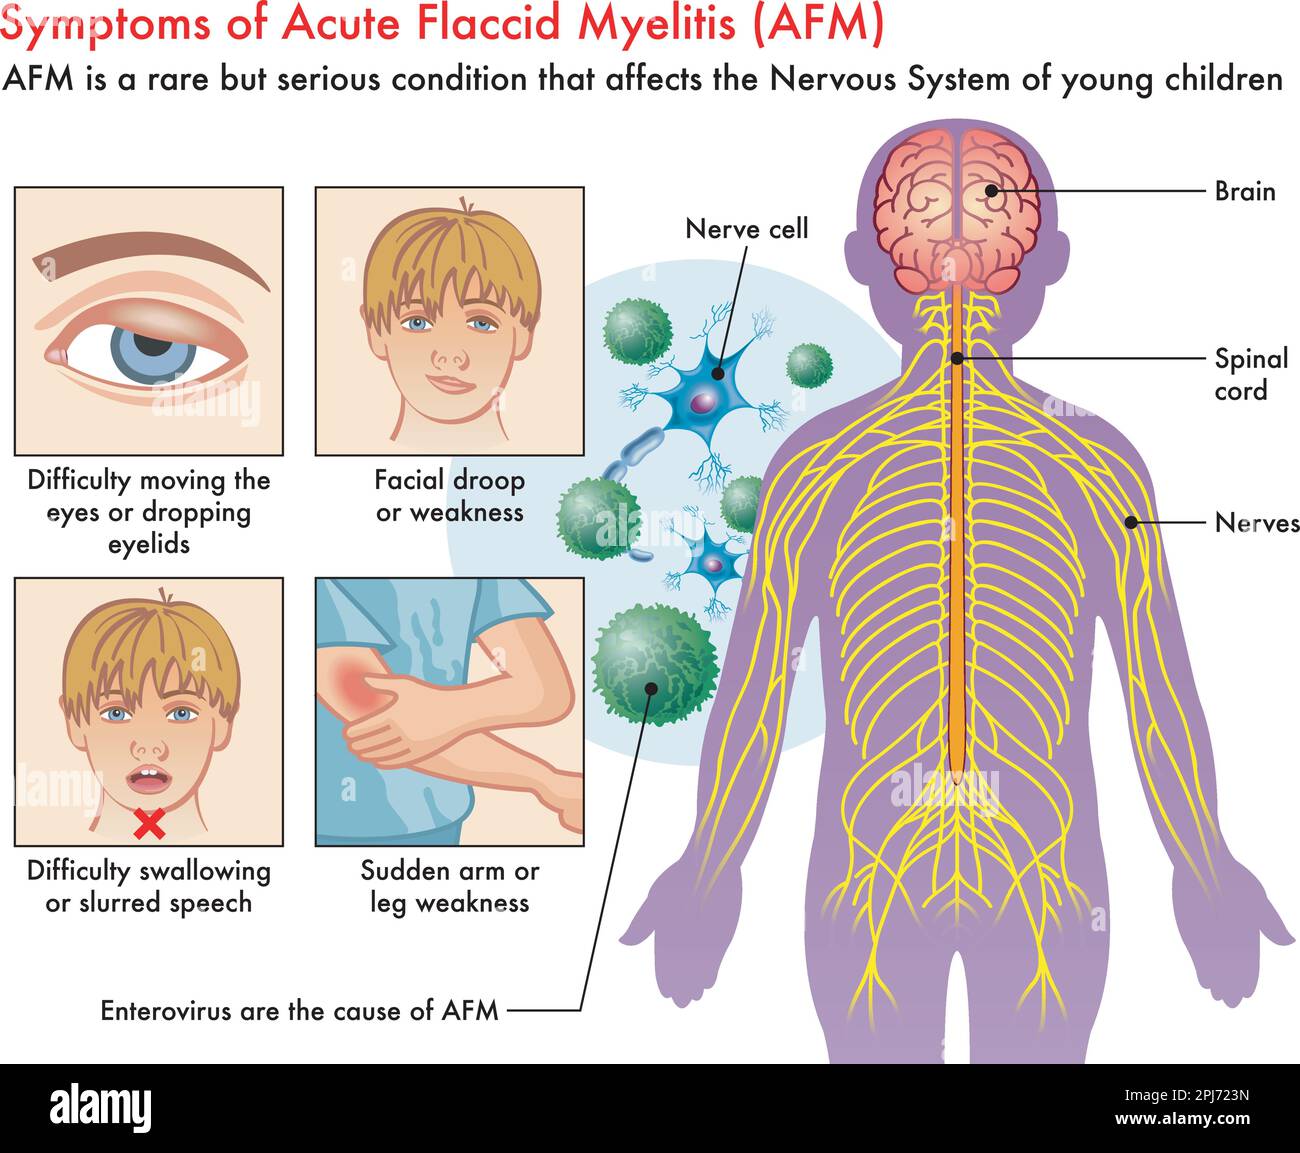 Medical illustration of Symptoms of Acute Flaccid Myelitis (AFM), with annotations. Stock Vector